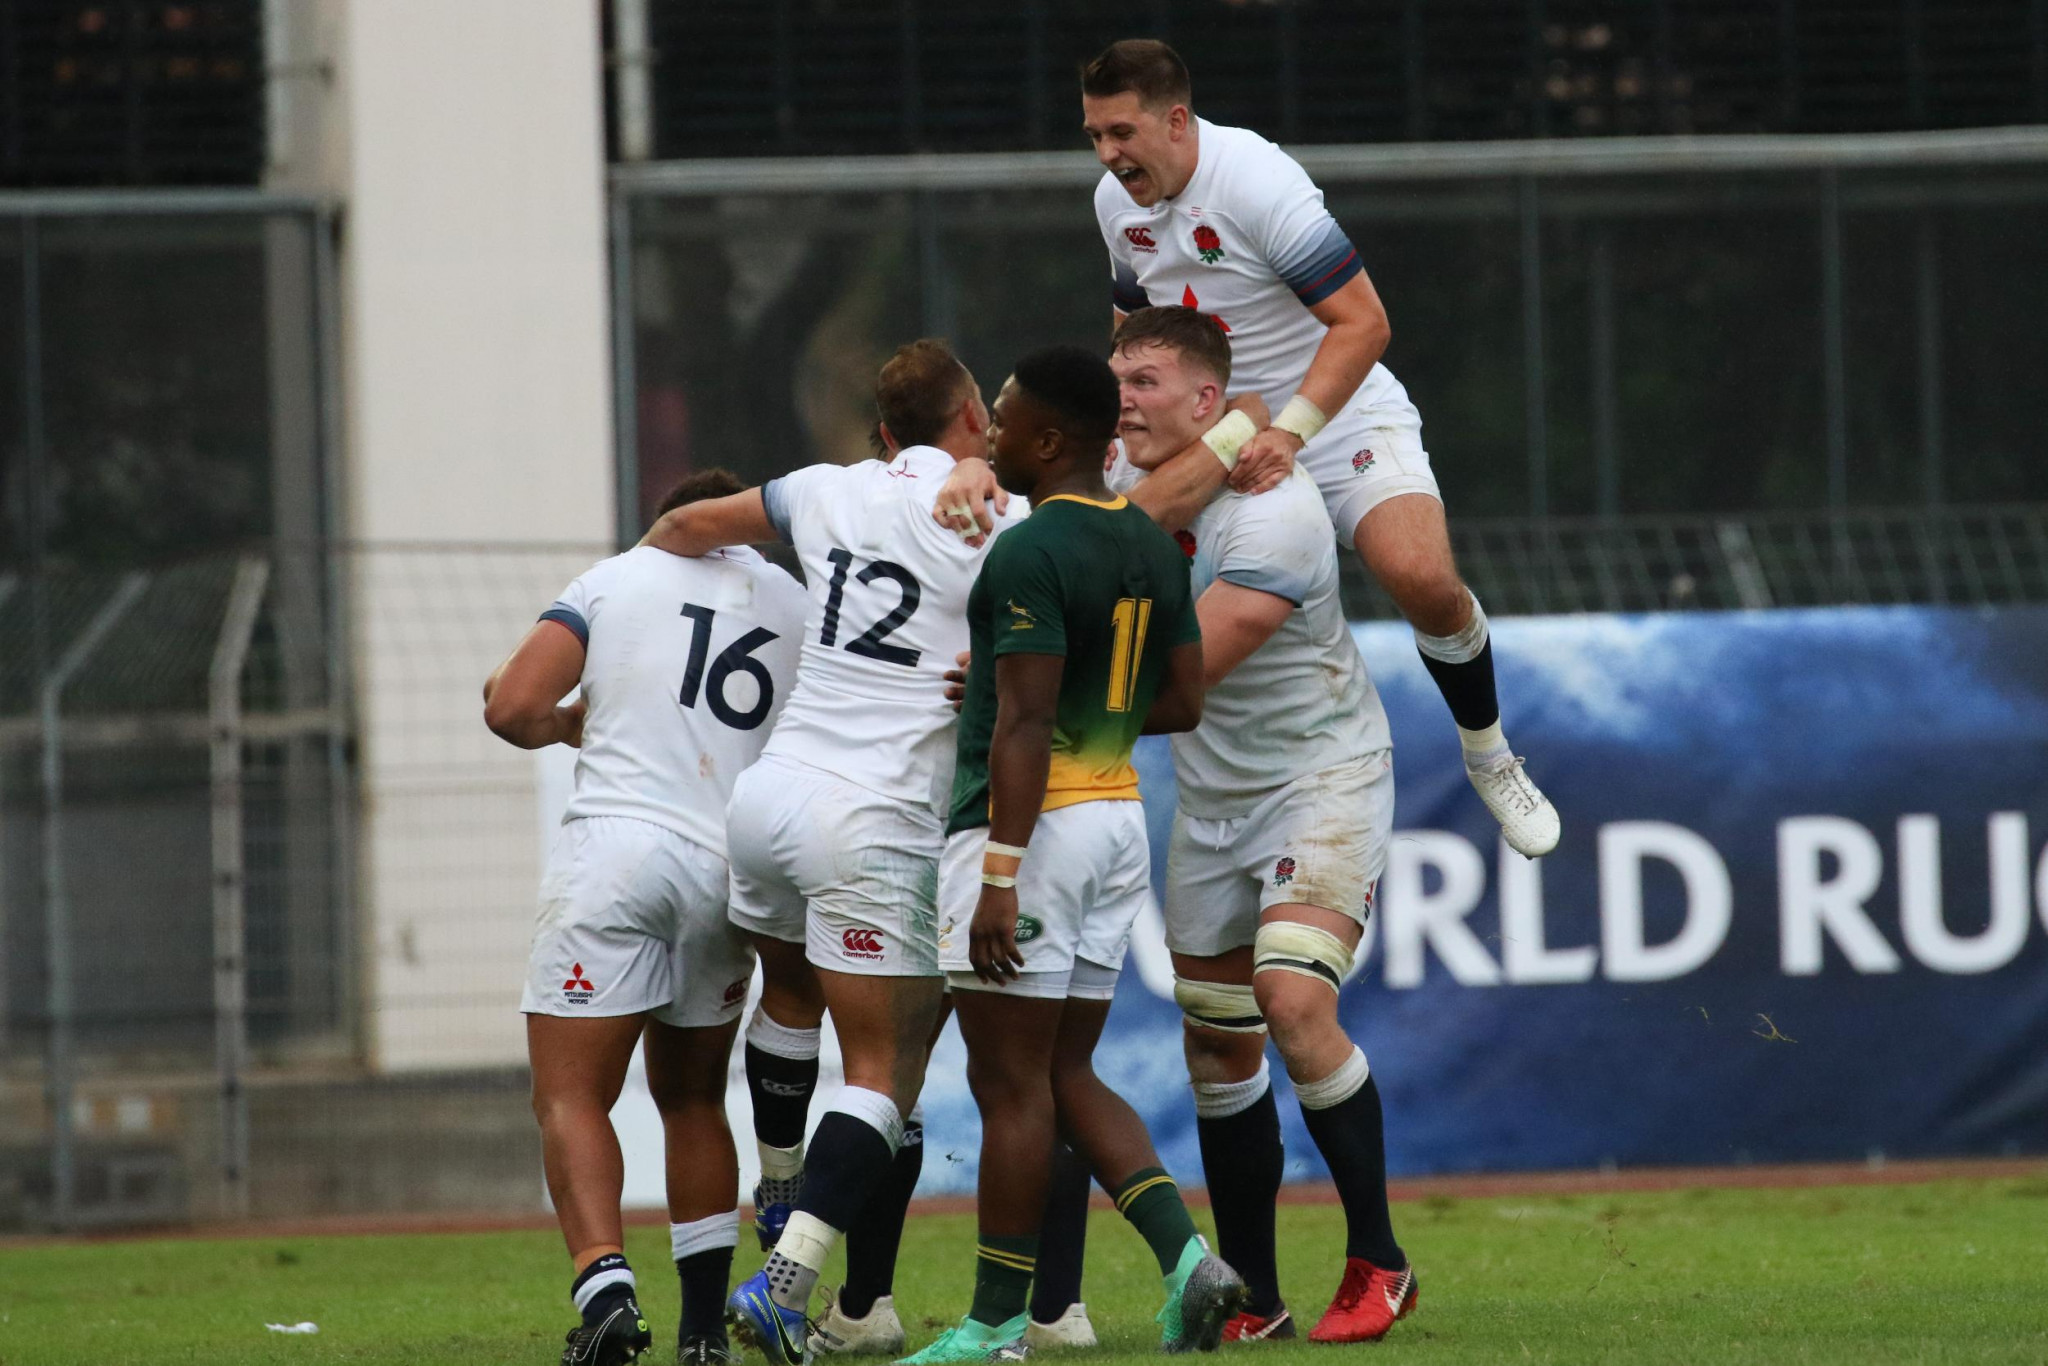 England held on against South Africa to reach their sixth straight final ©World Rugby